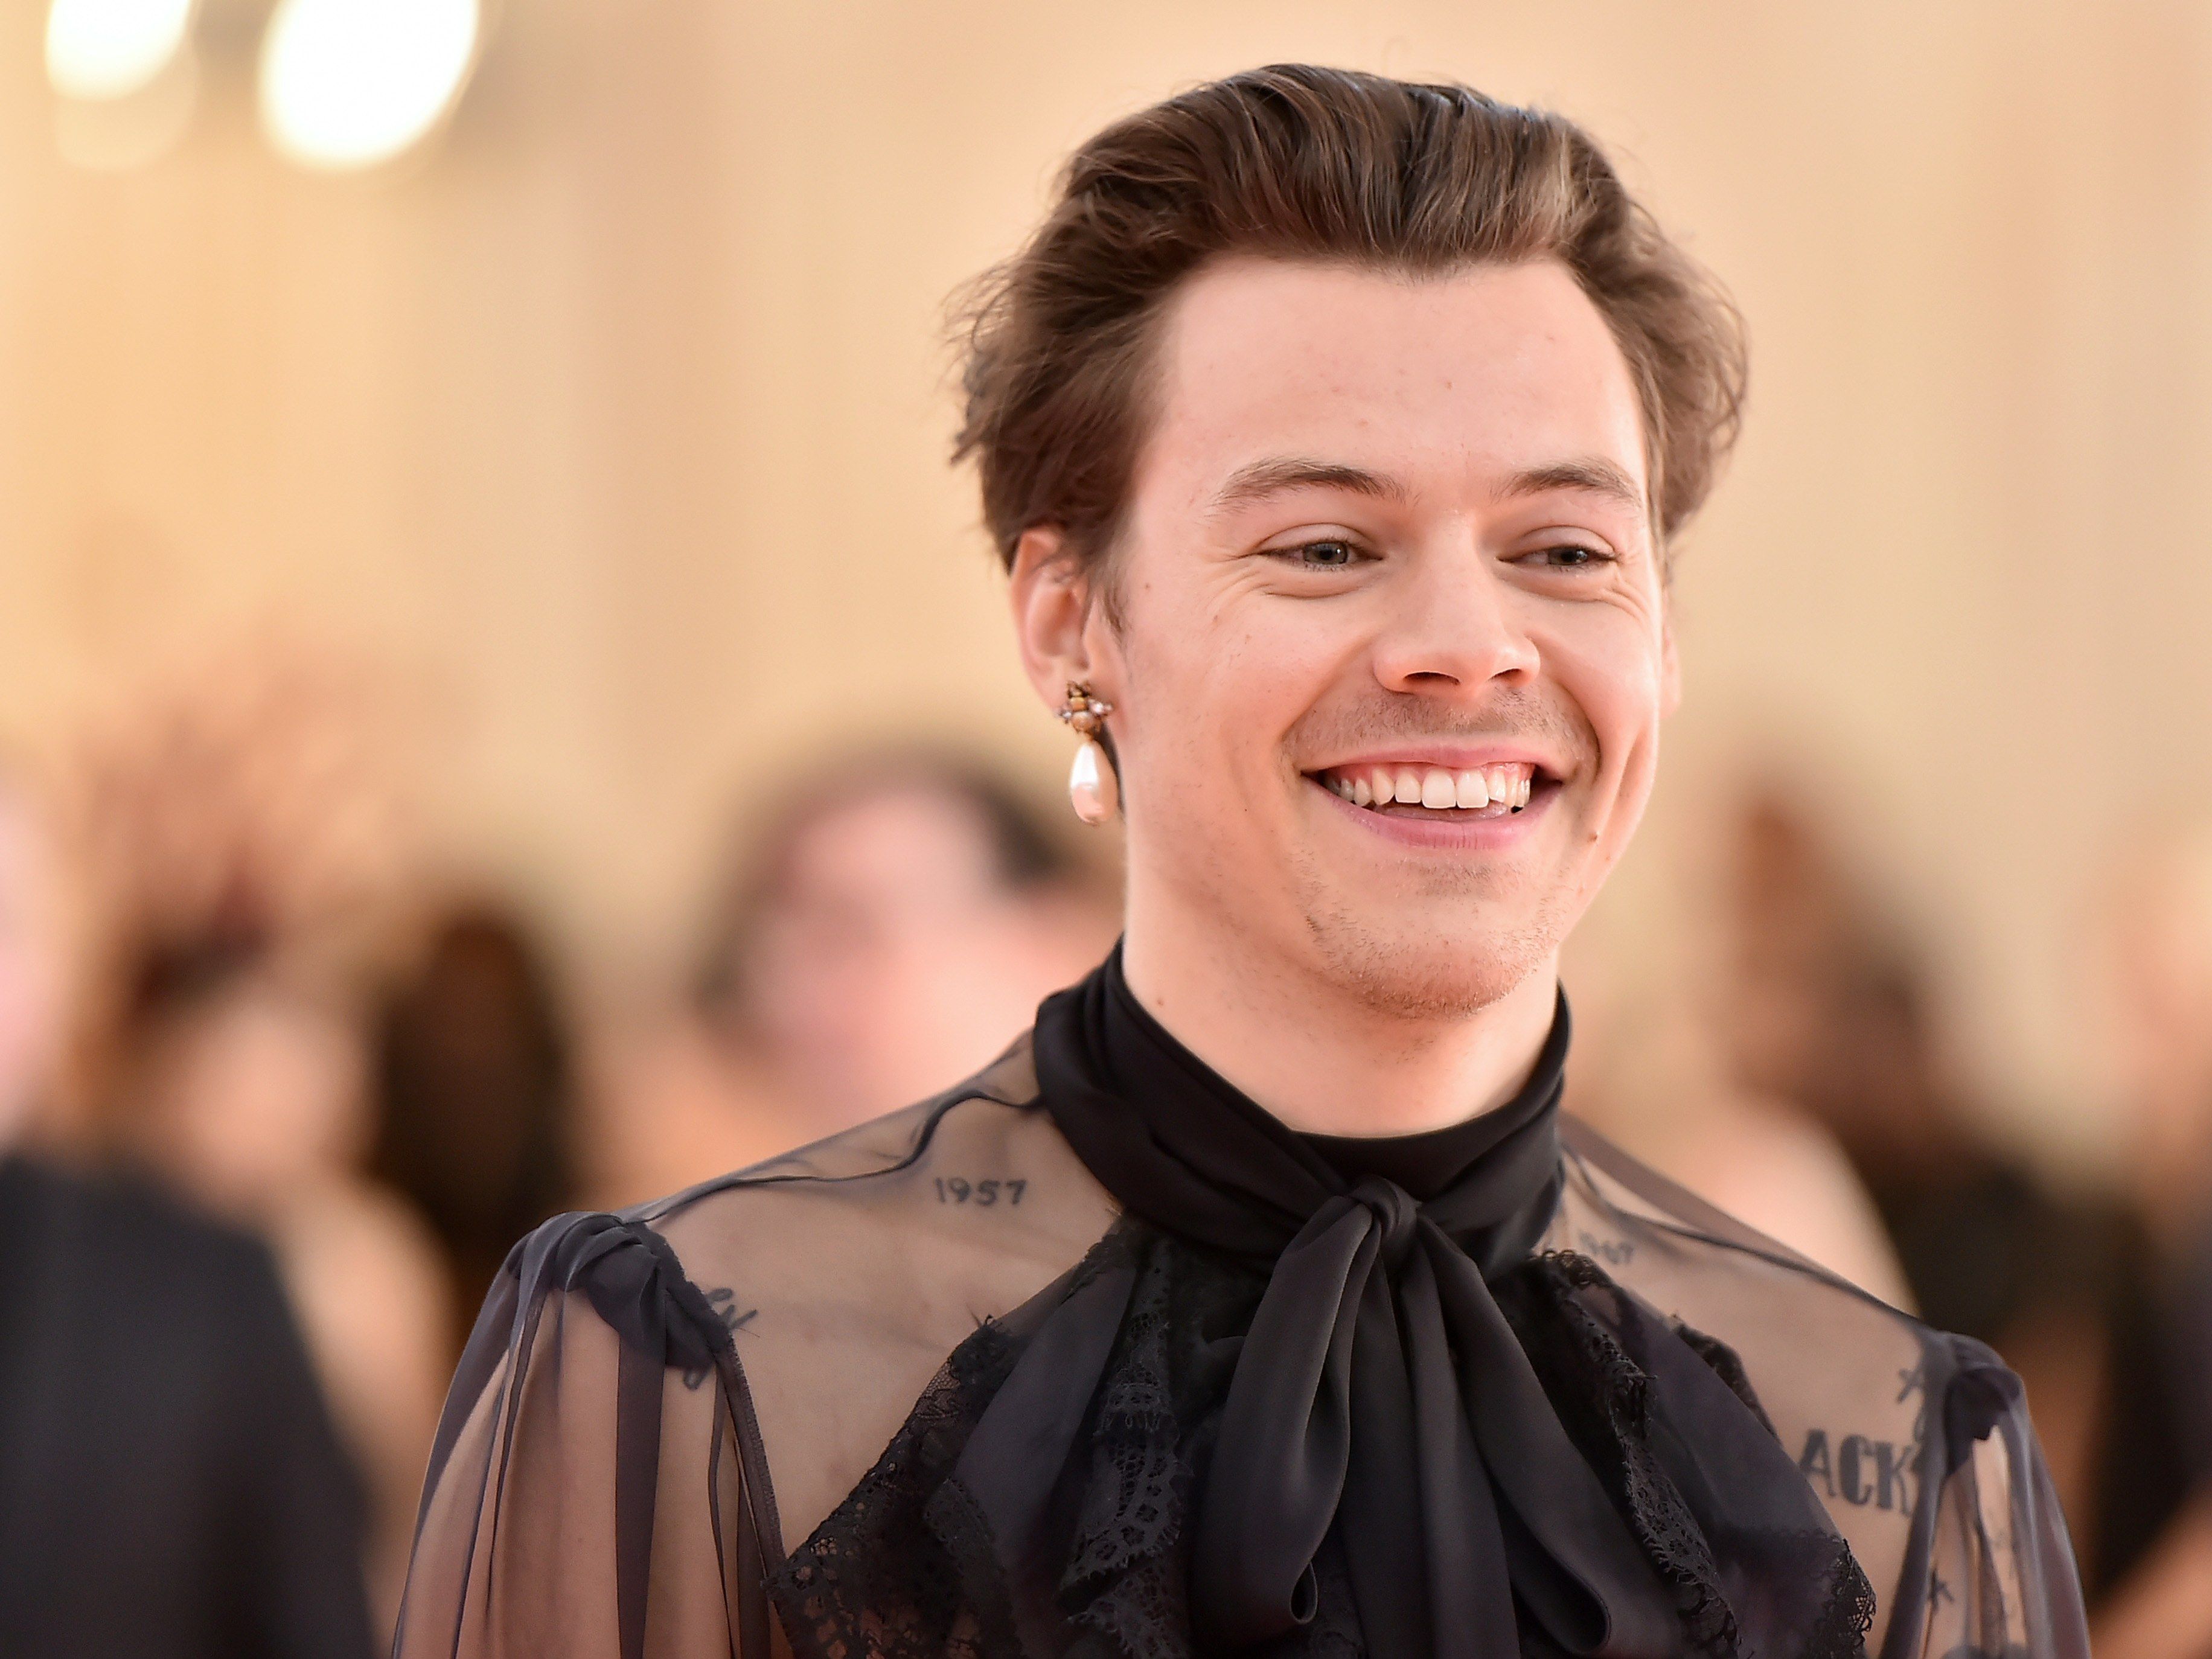 Harry Styles Said Gender Norms Are Fading in All Areas of Life